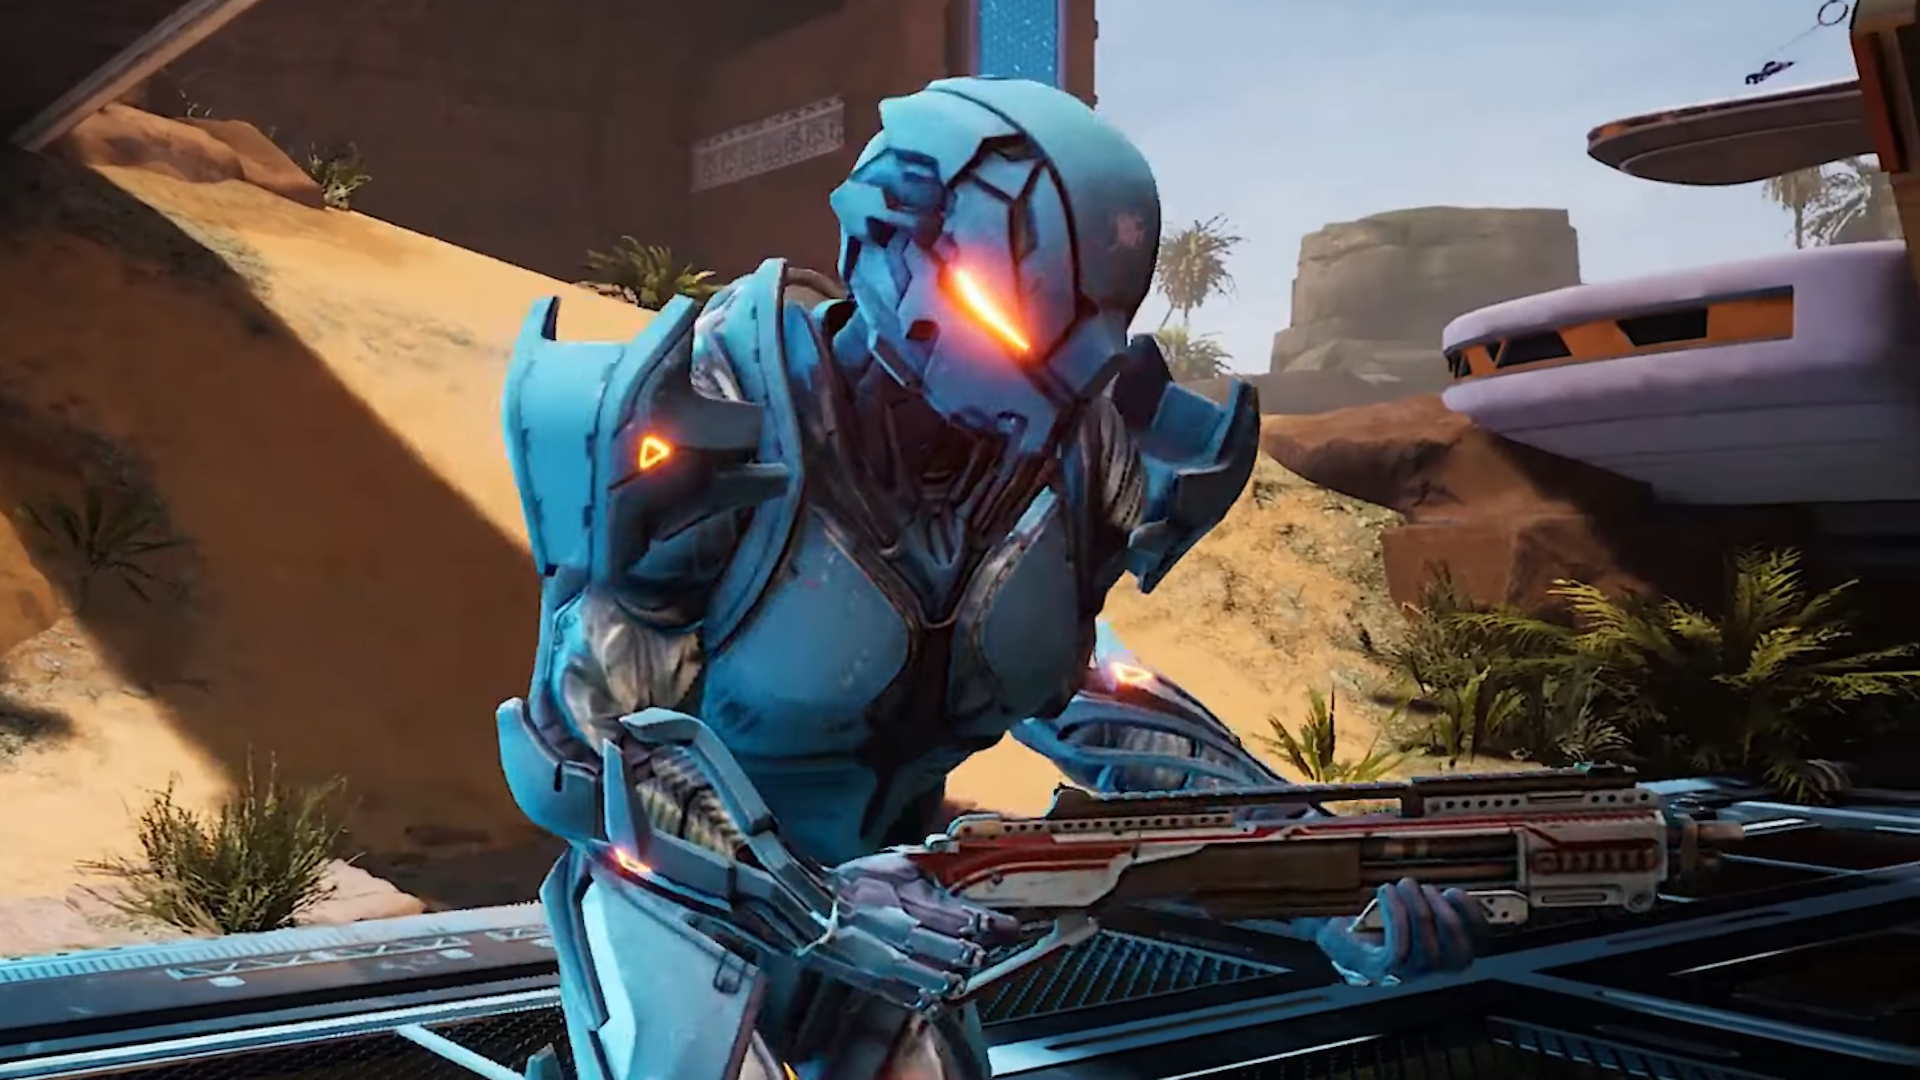 Splitgate on X: 📰Dev Blog #2 is out now: Splitgate's Future in